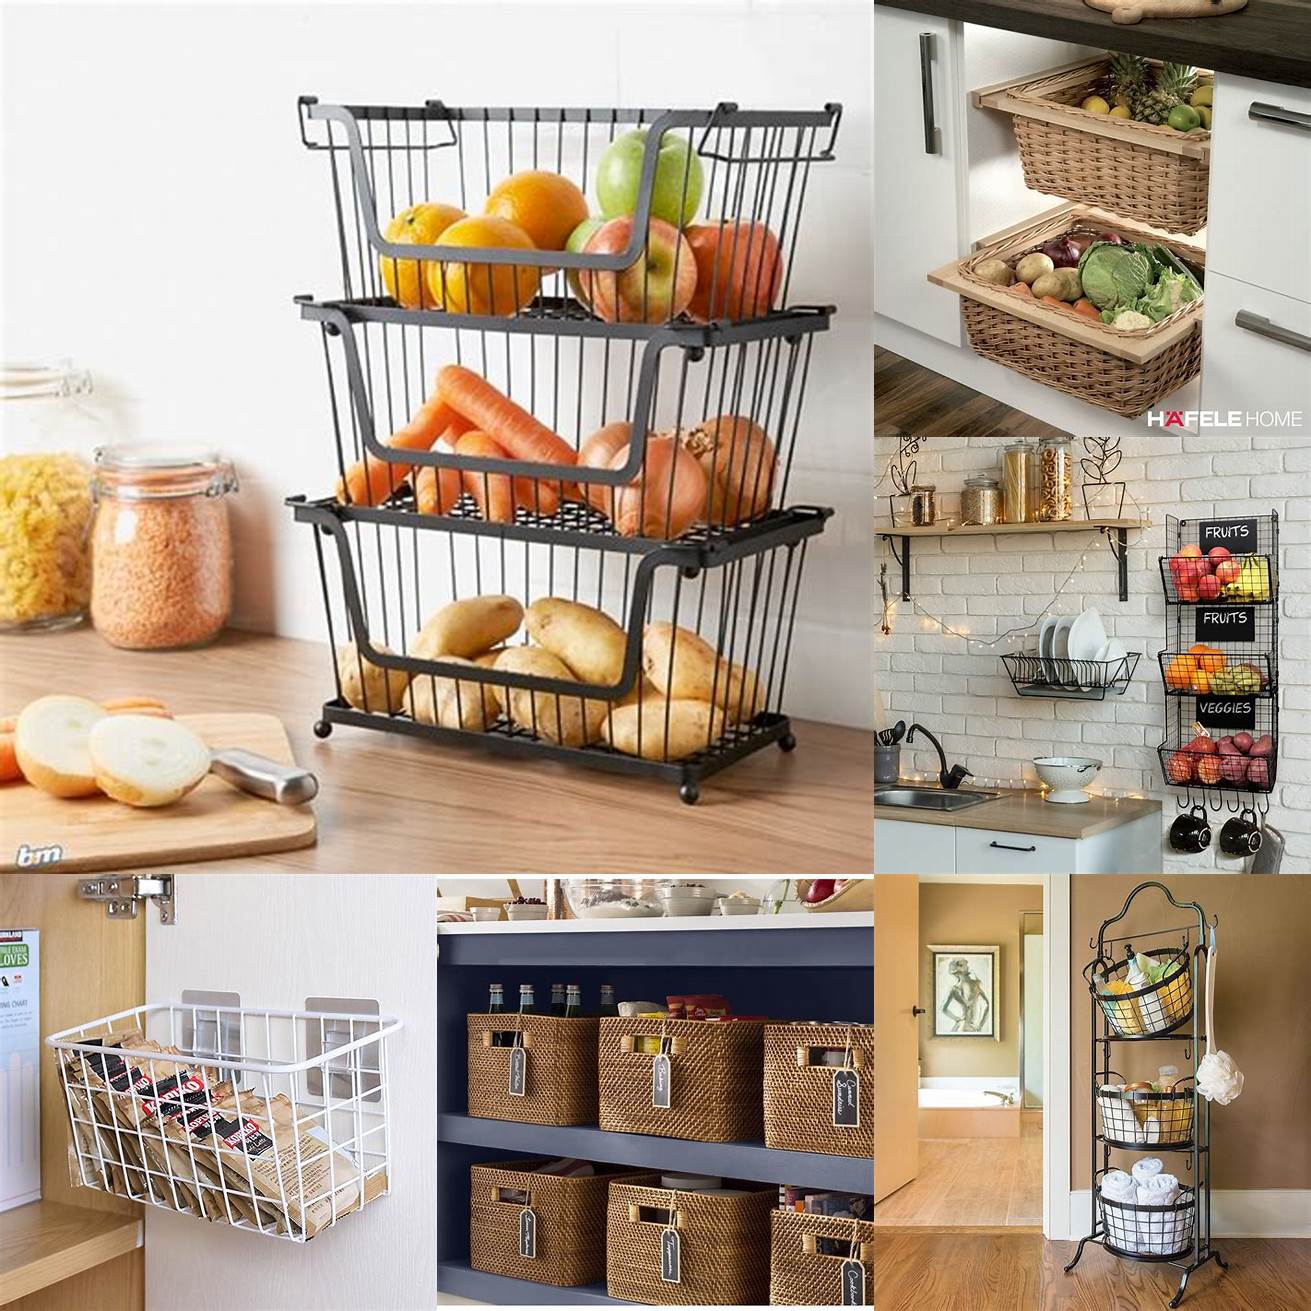 3 Use baskets or storage boxes to add functional storage to your kitchen